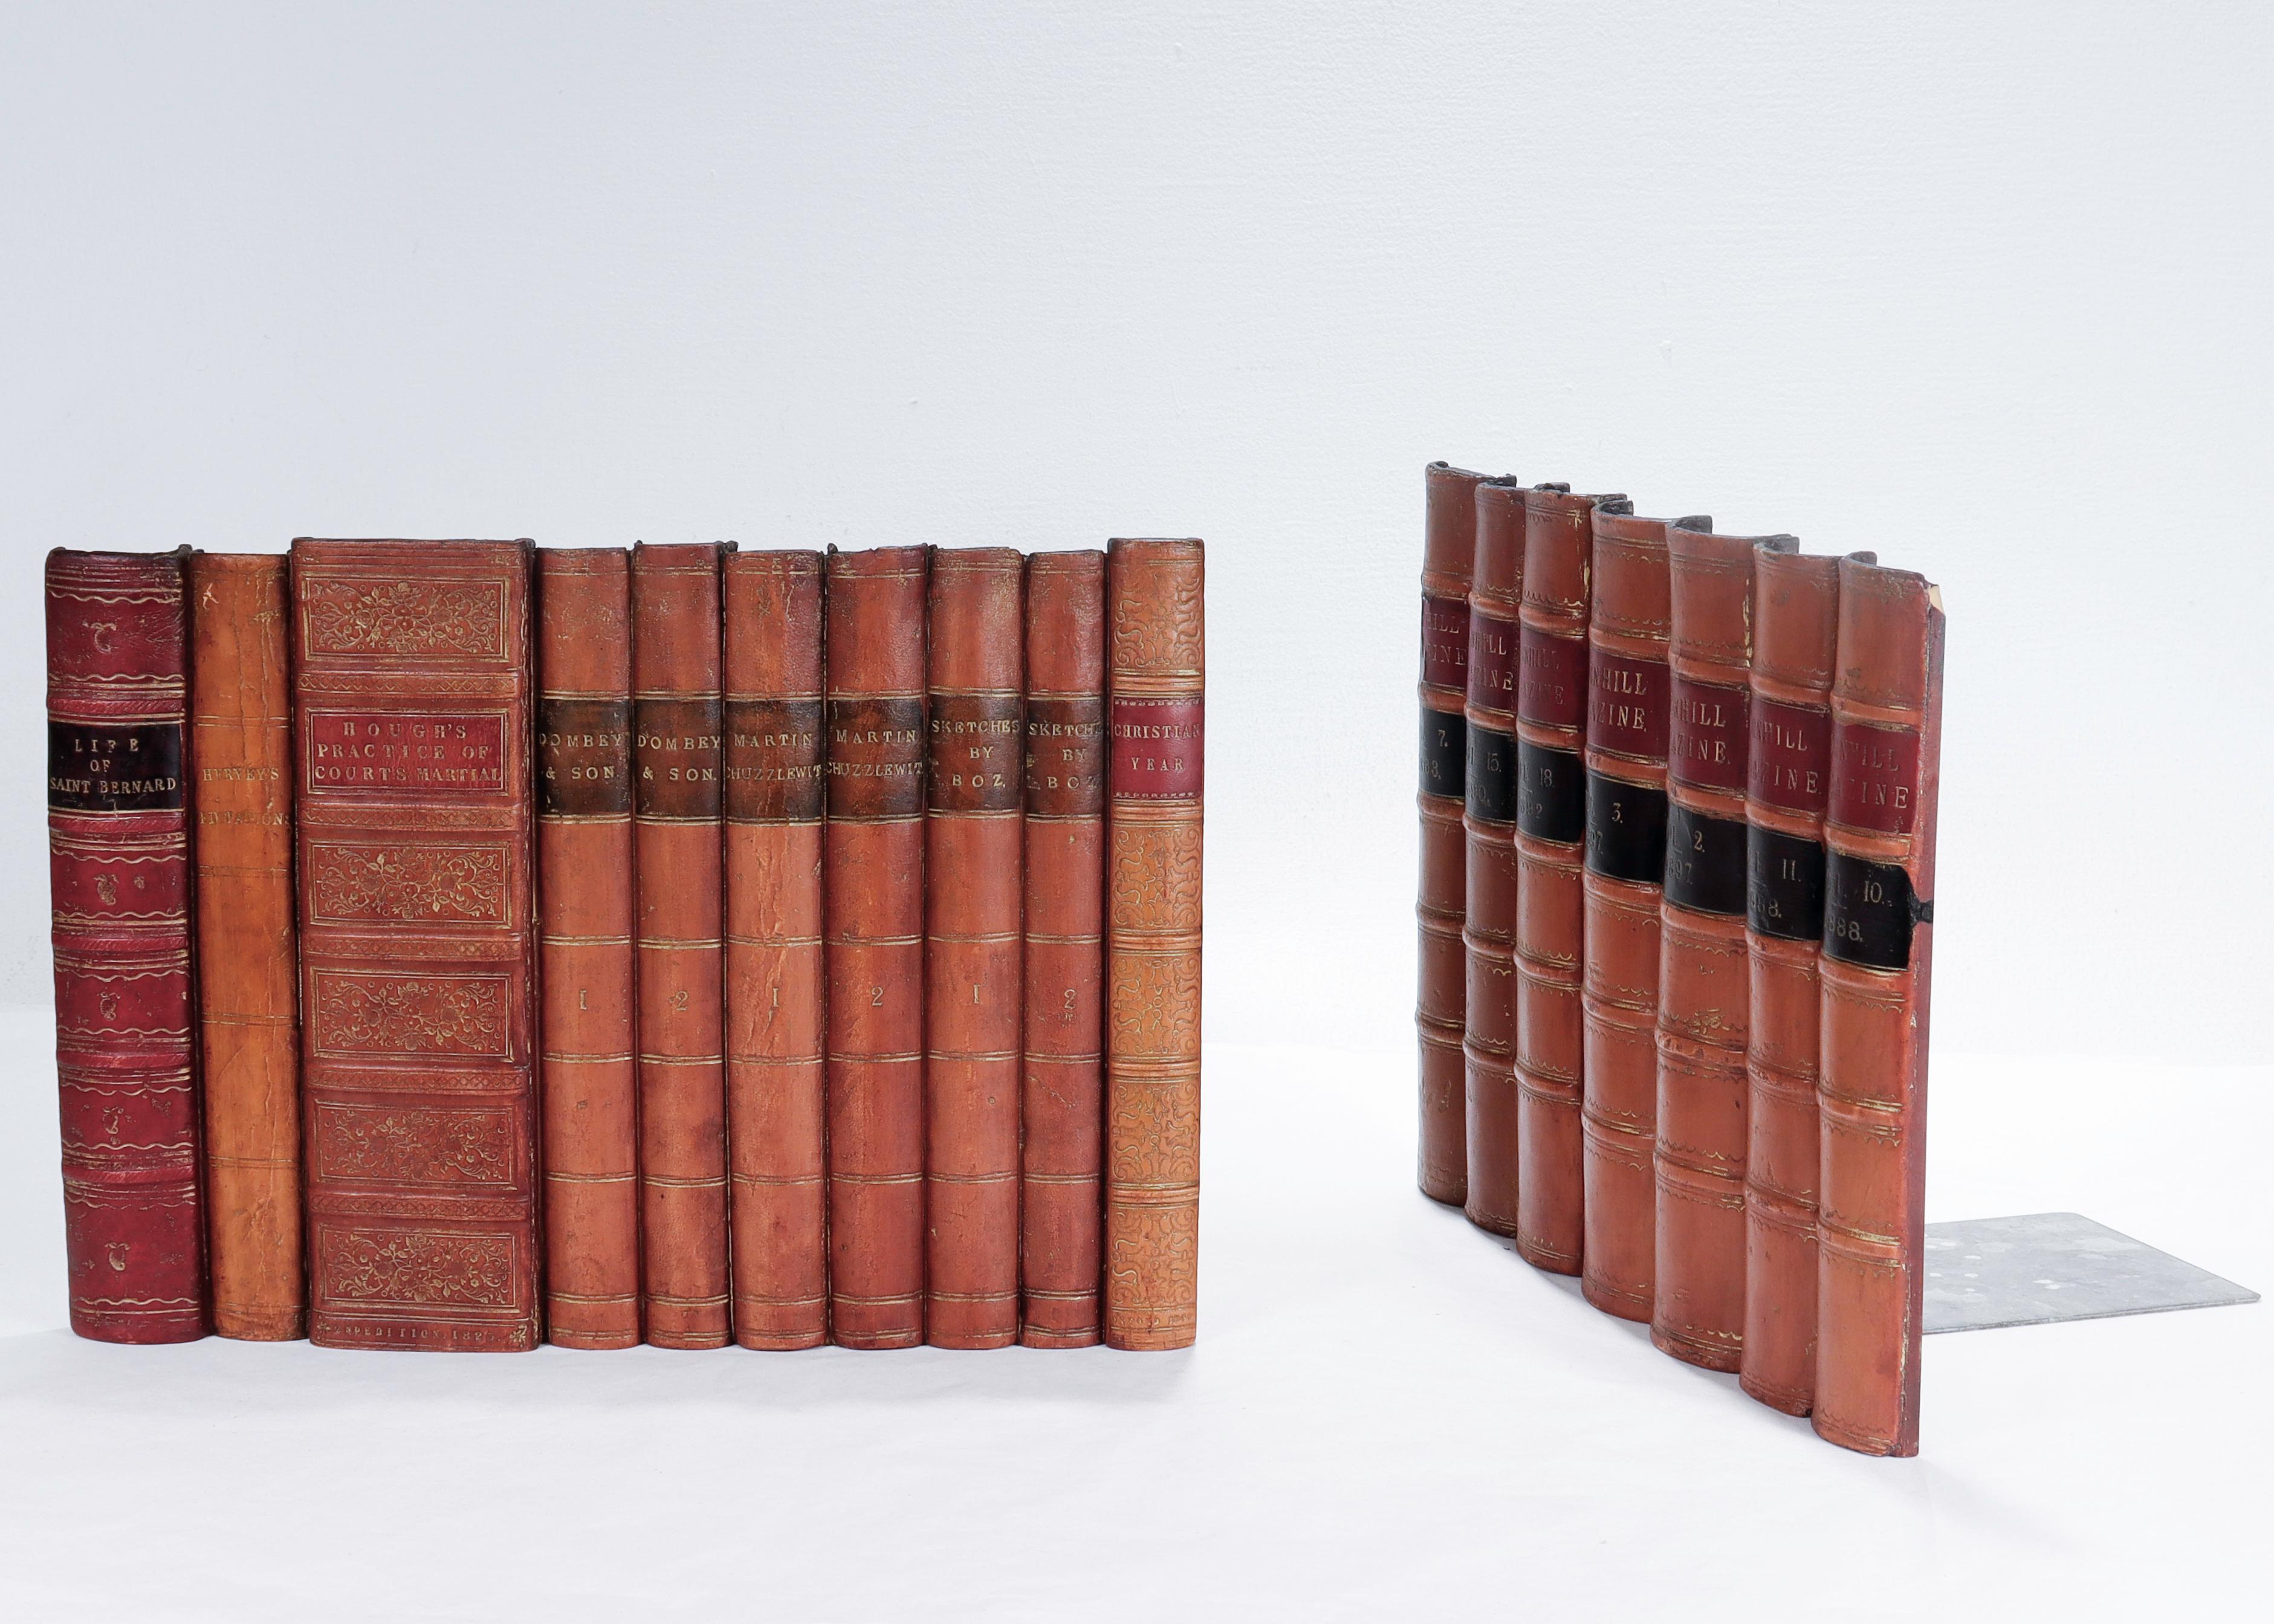 Two panels of faux leather bound books.

With aged leather book spines, cast epoxy backs, and velcro L-brackets to the reverse to allow them to stand on their own.

Perfect for shelf decorating or hiding a wall safe or valuables.

Simply a terrific